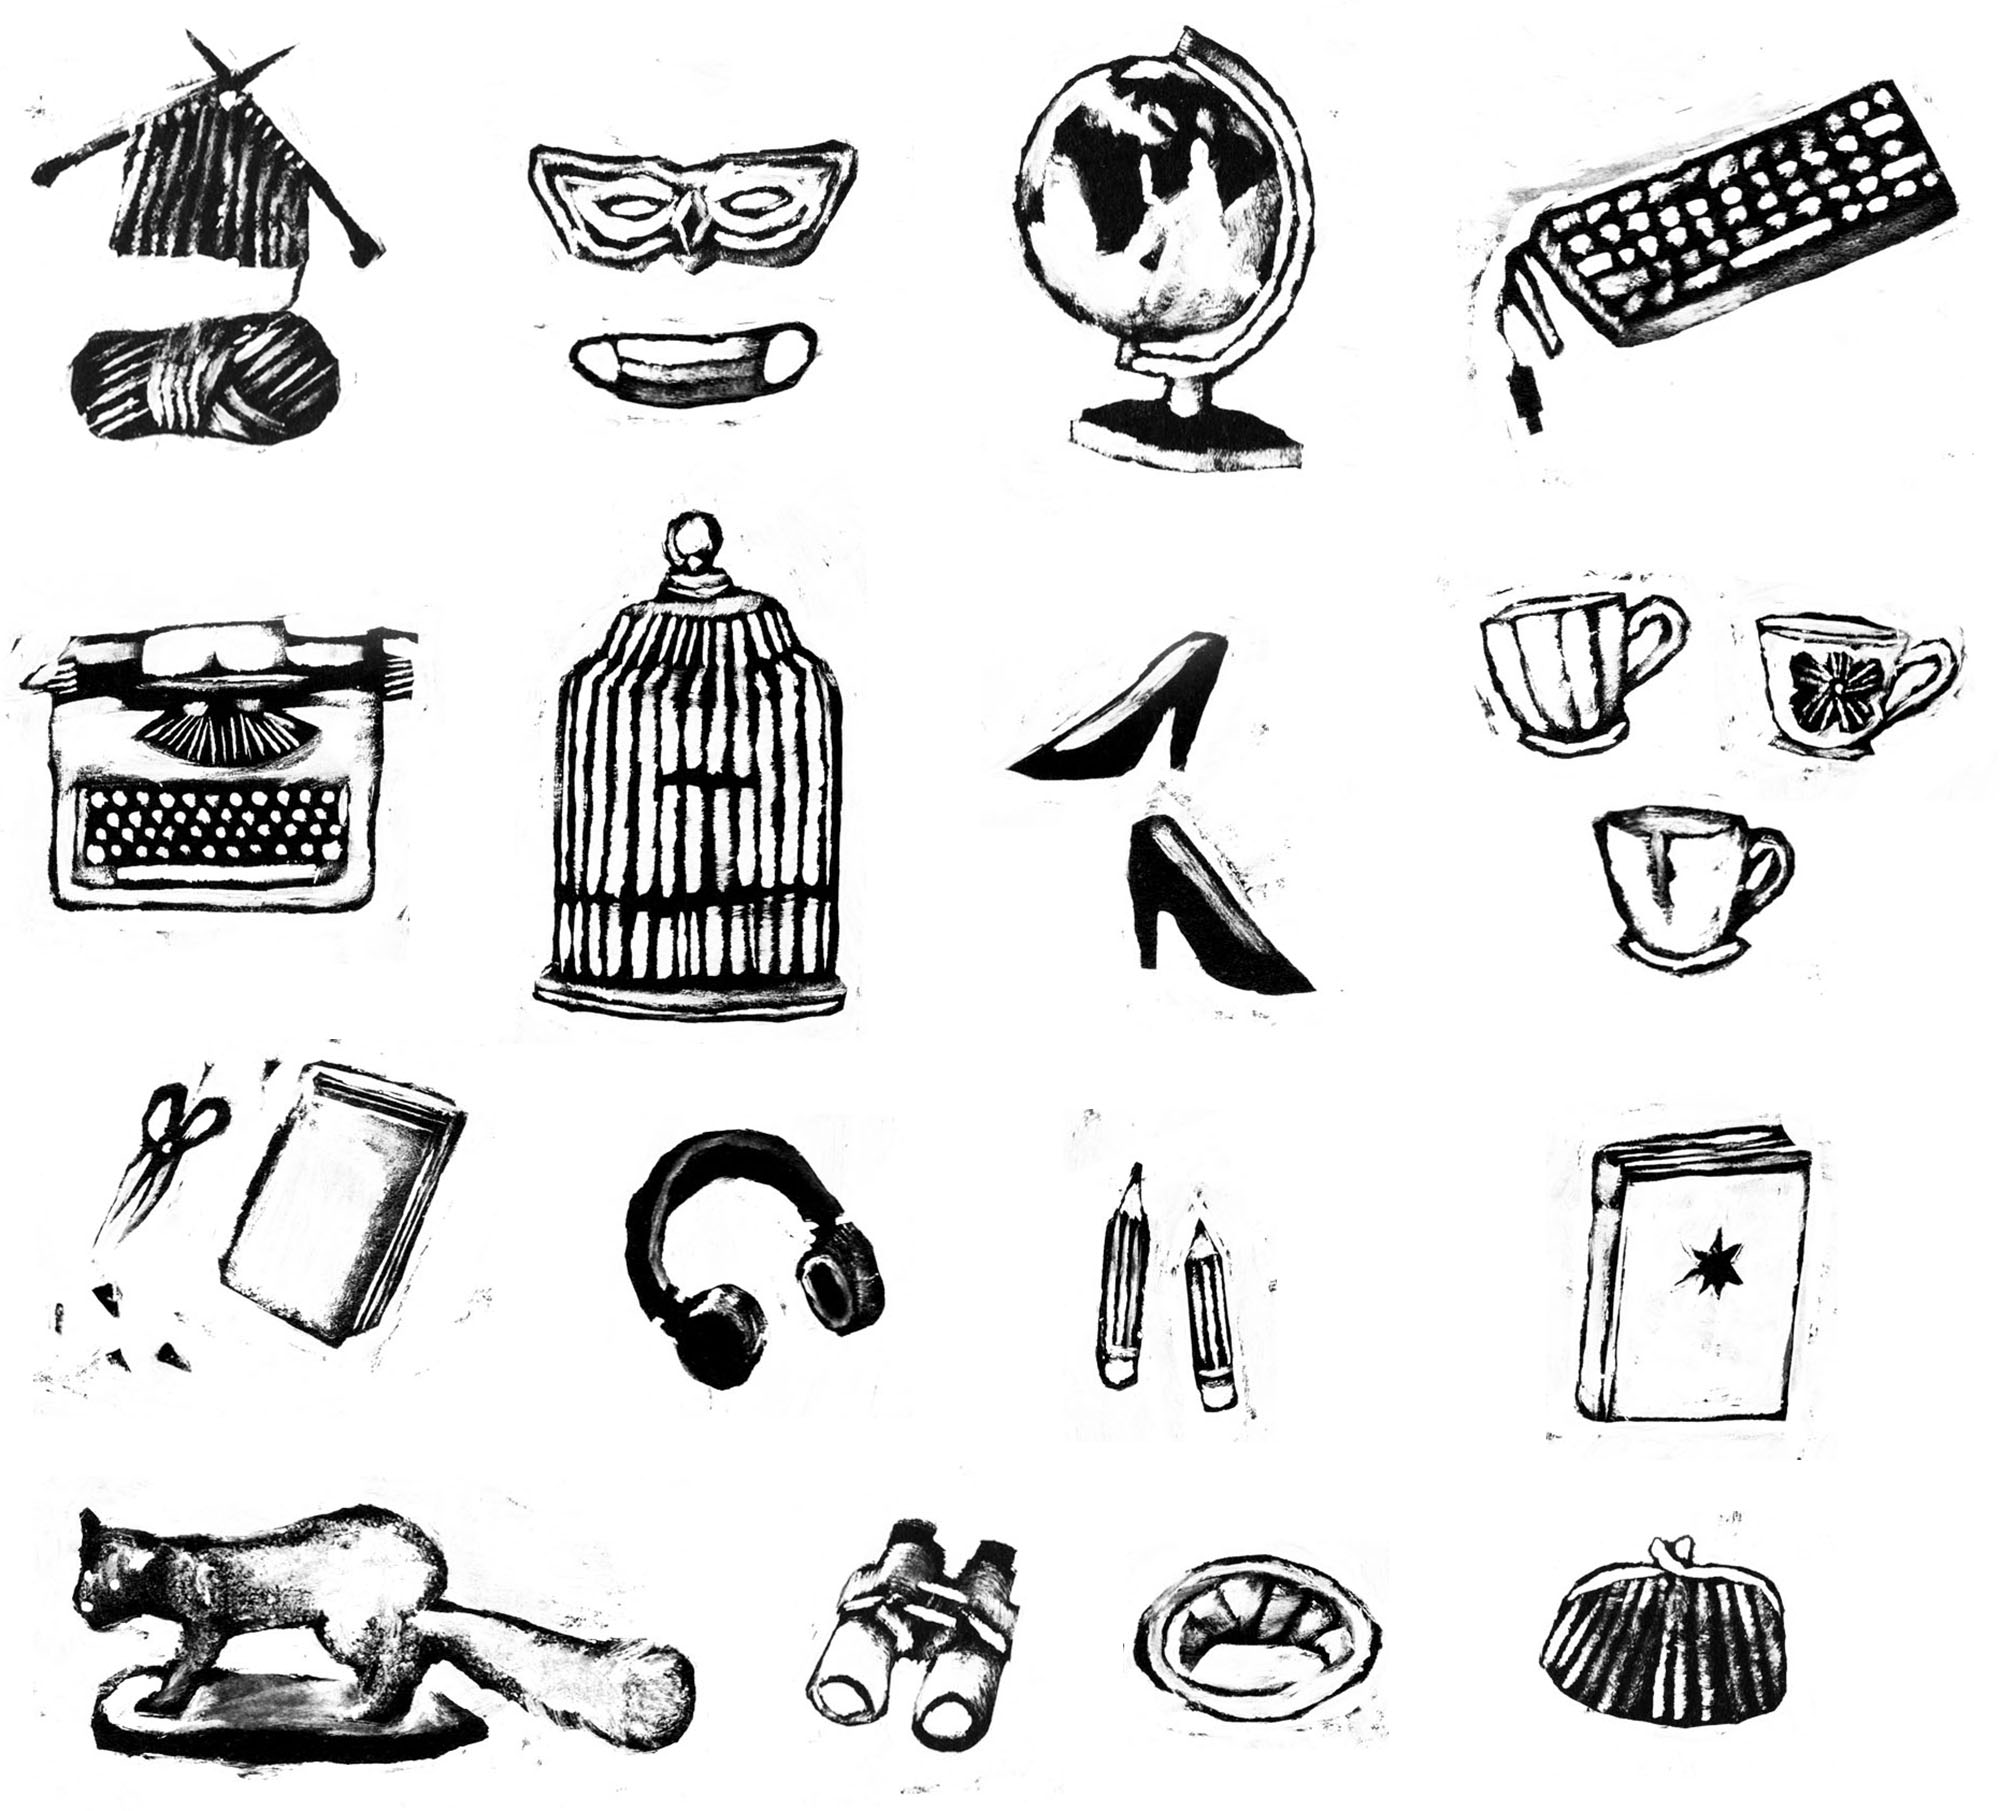 Monochrome spot illustrations of various objects